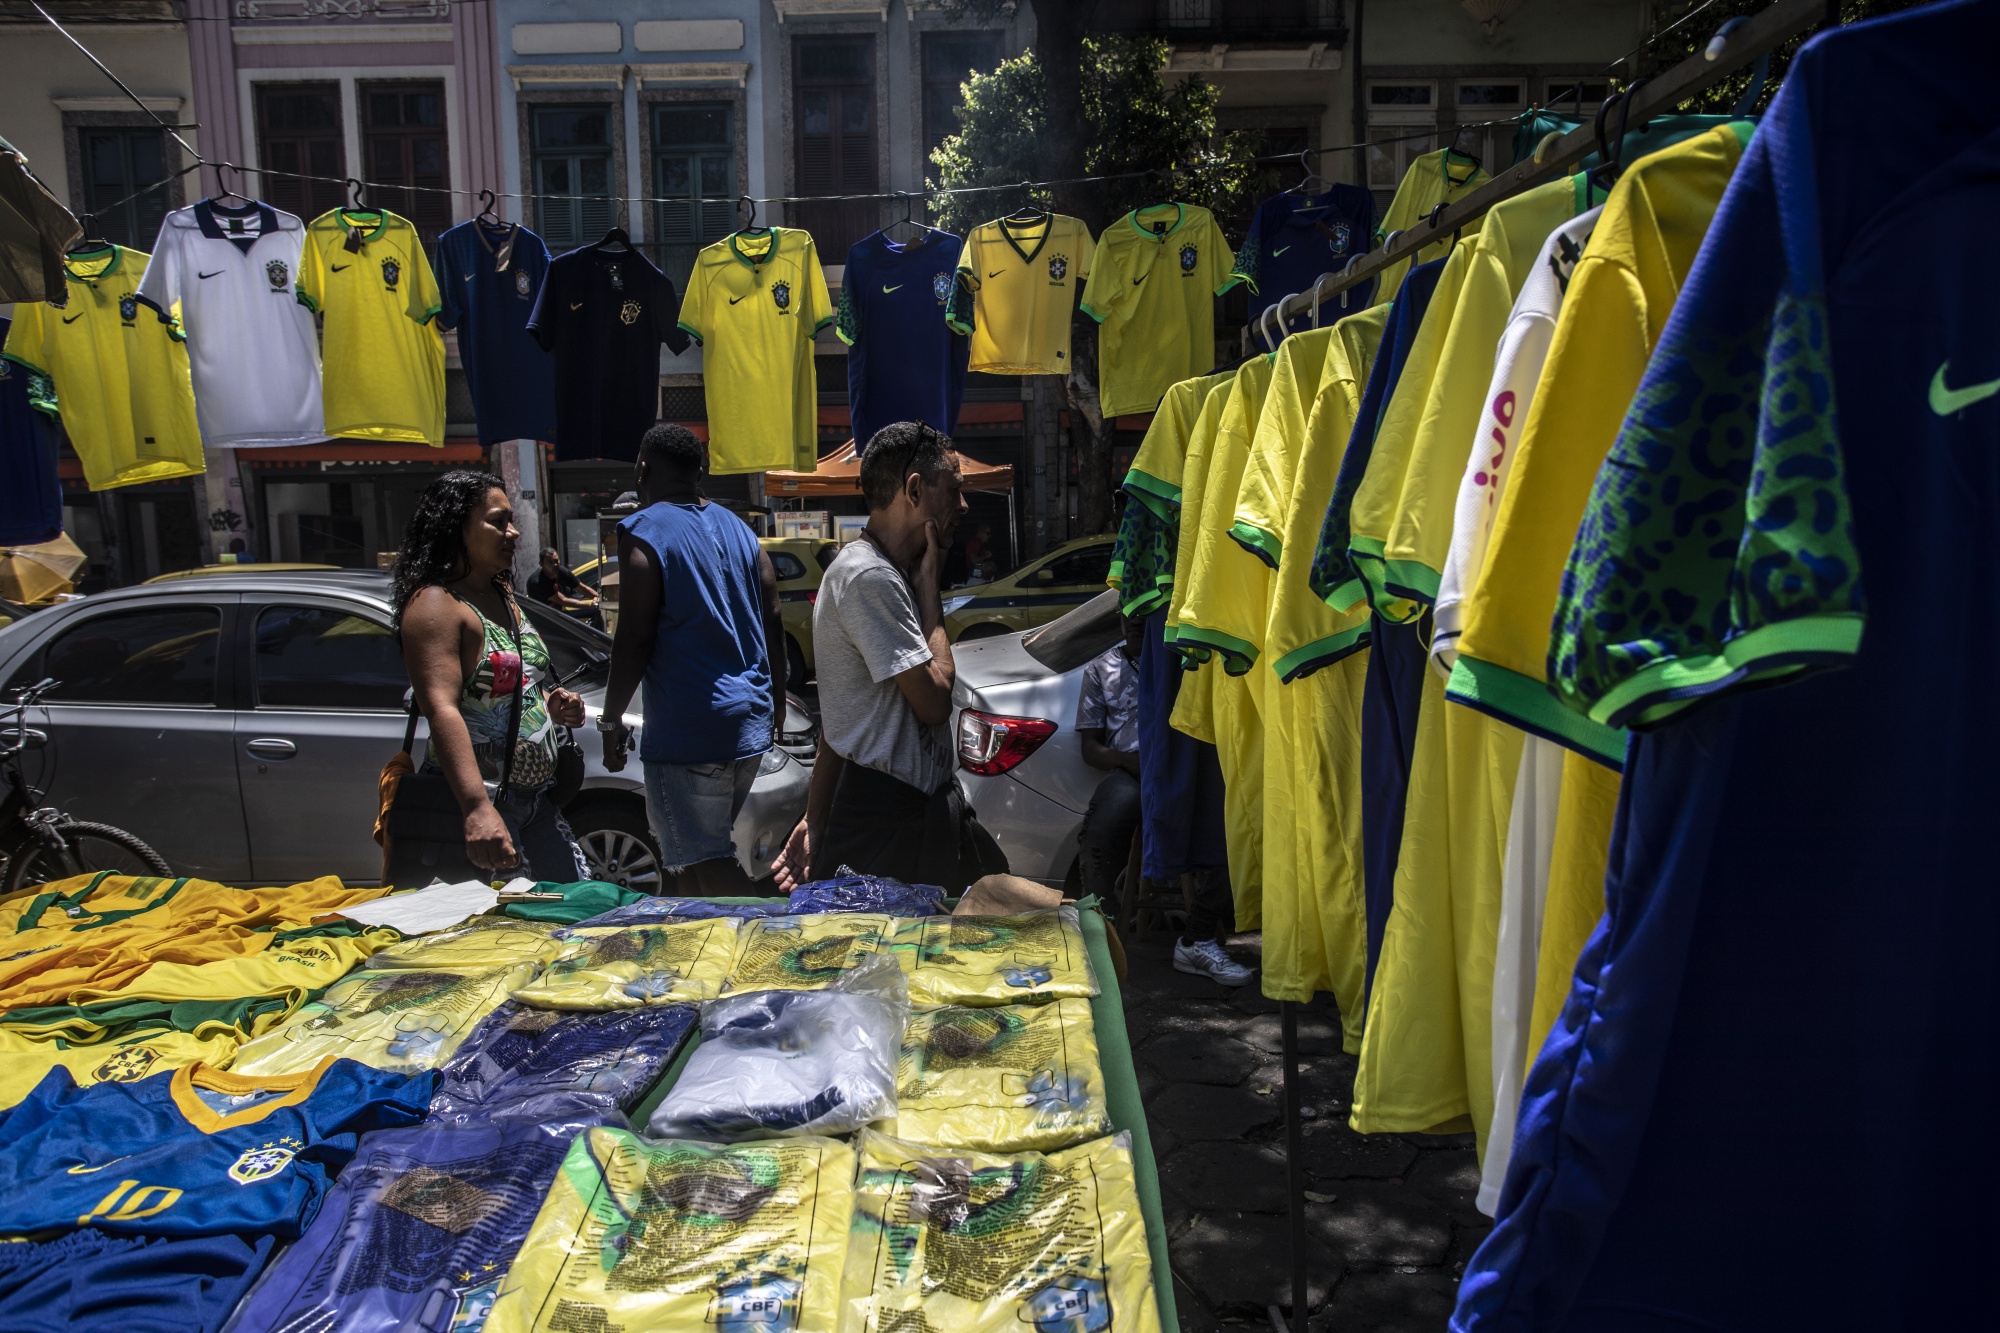 Adidas withdraws 'sexualised' World Cup T-shirts after Brazil